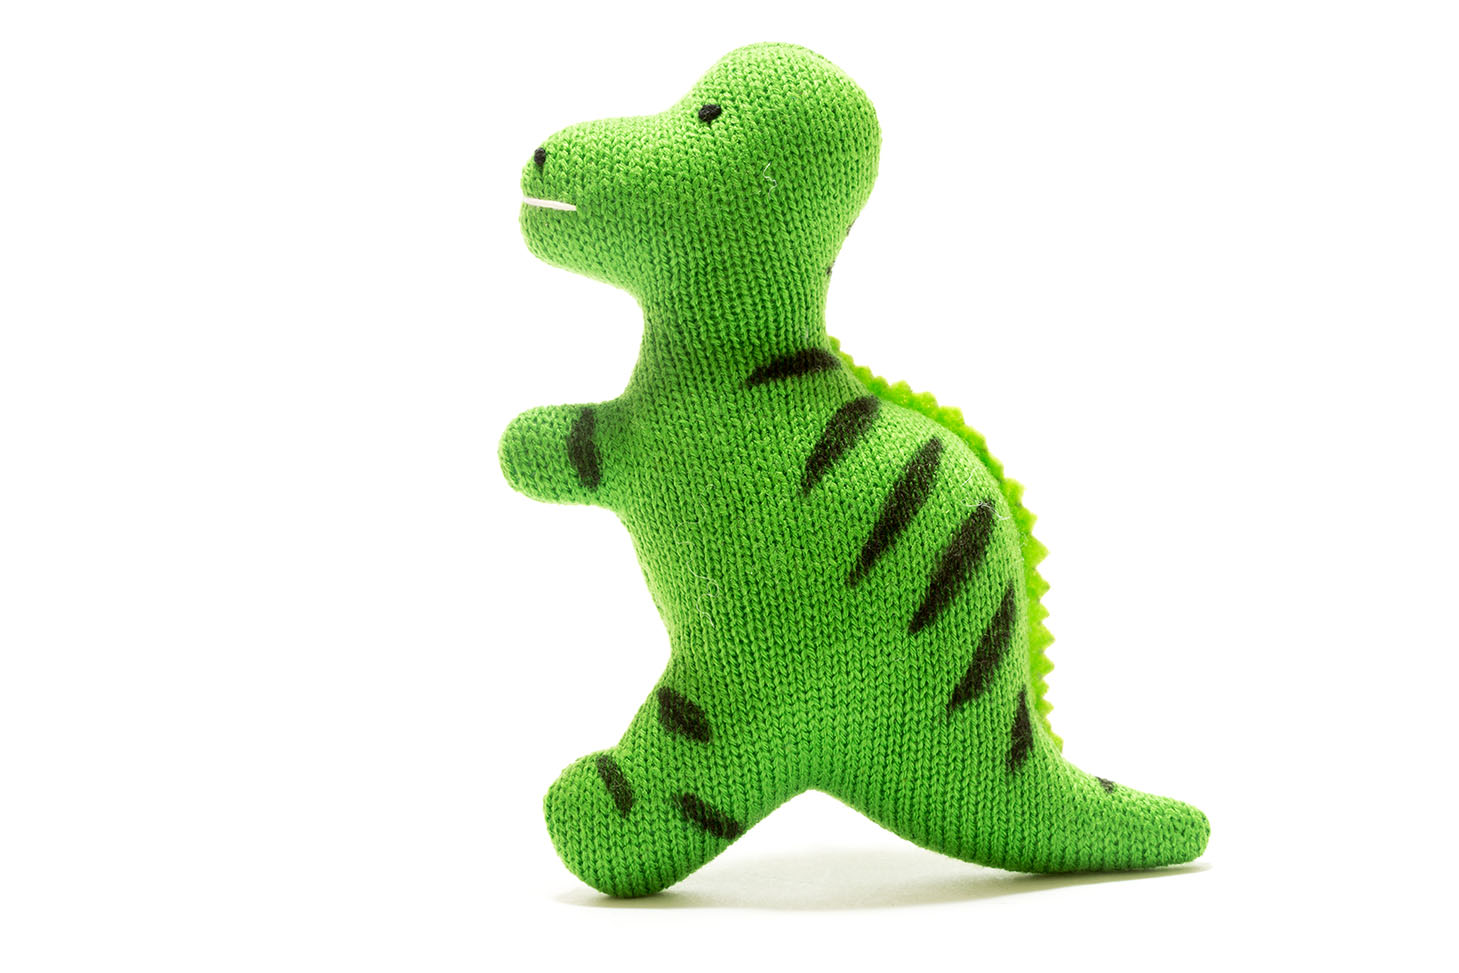 Baby T Rex toy or T Rex toy for Baby